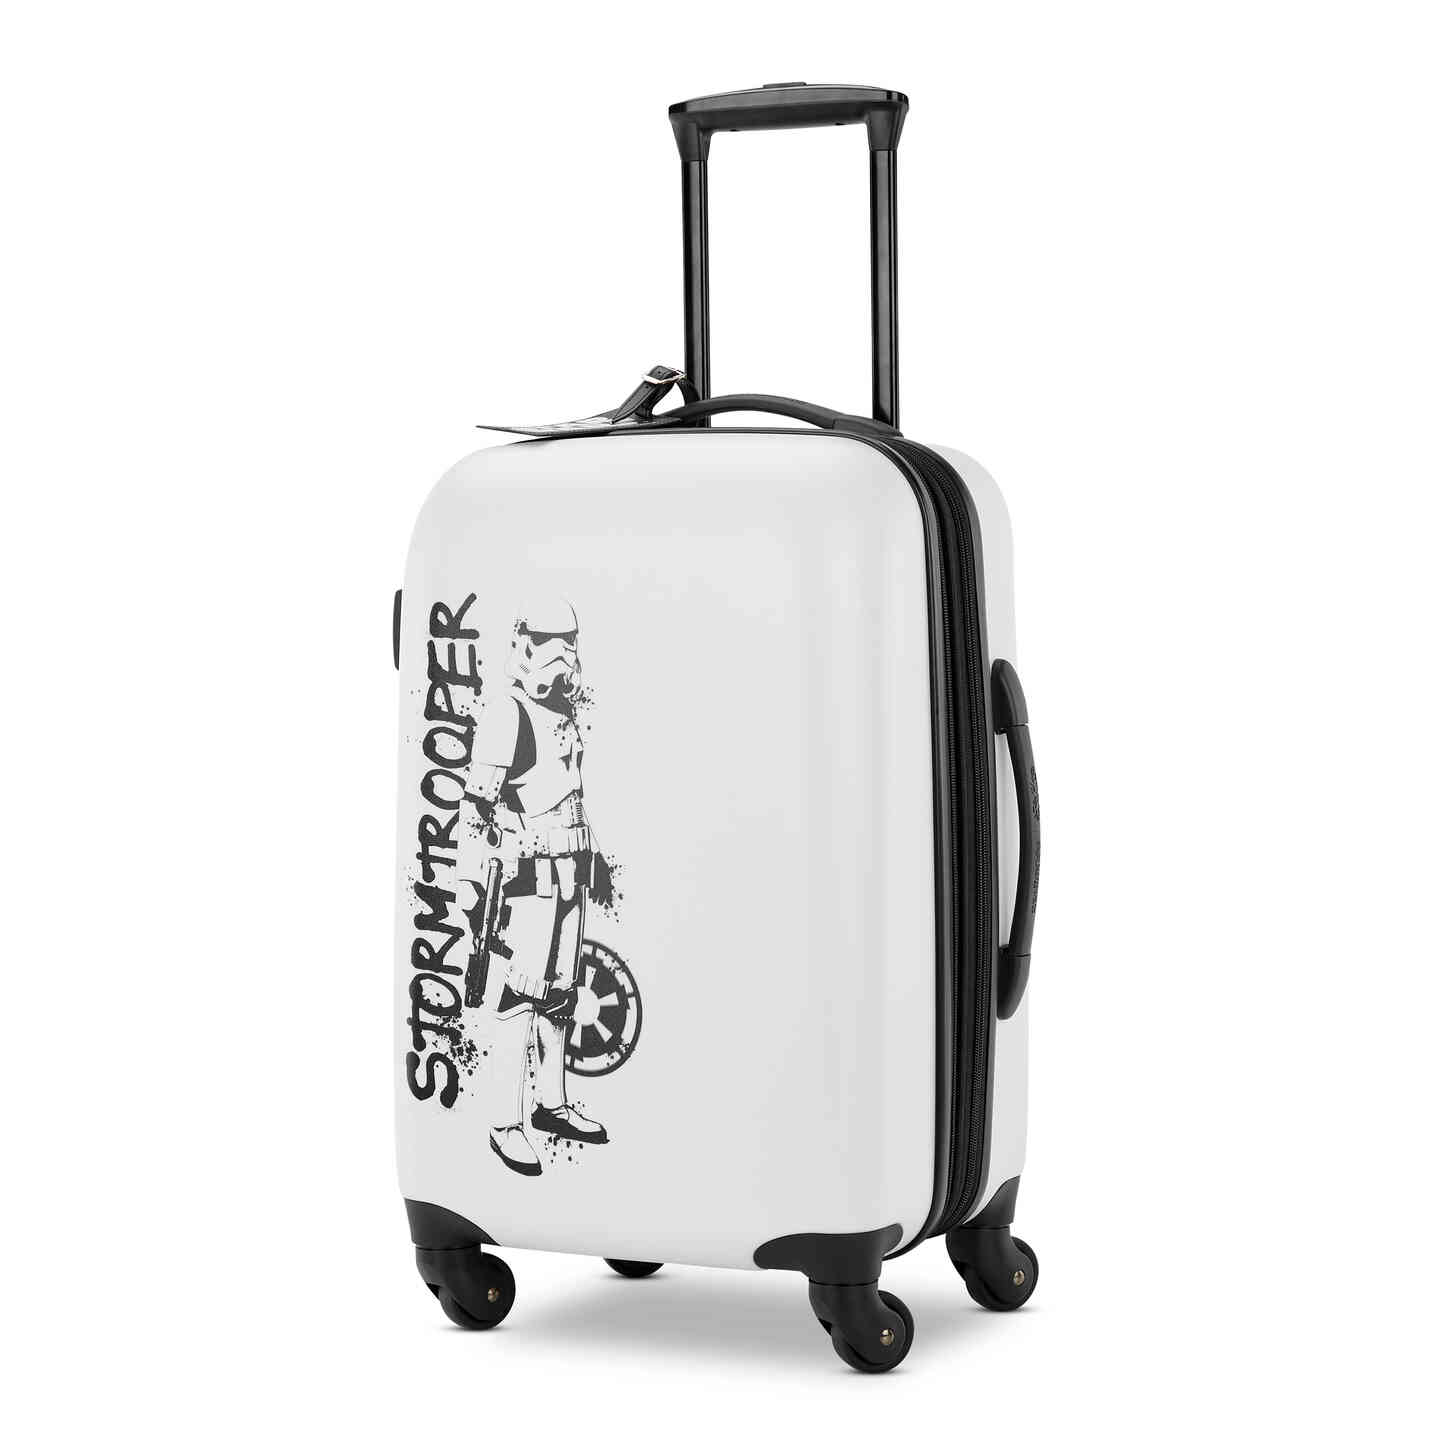 Click here to shop all luggage, bags and accessories in our Star Wars Storm Trooper prints.